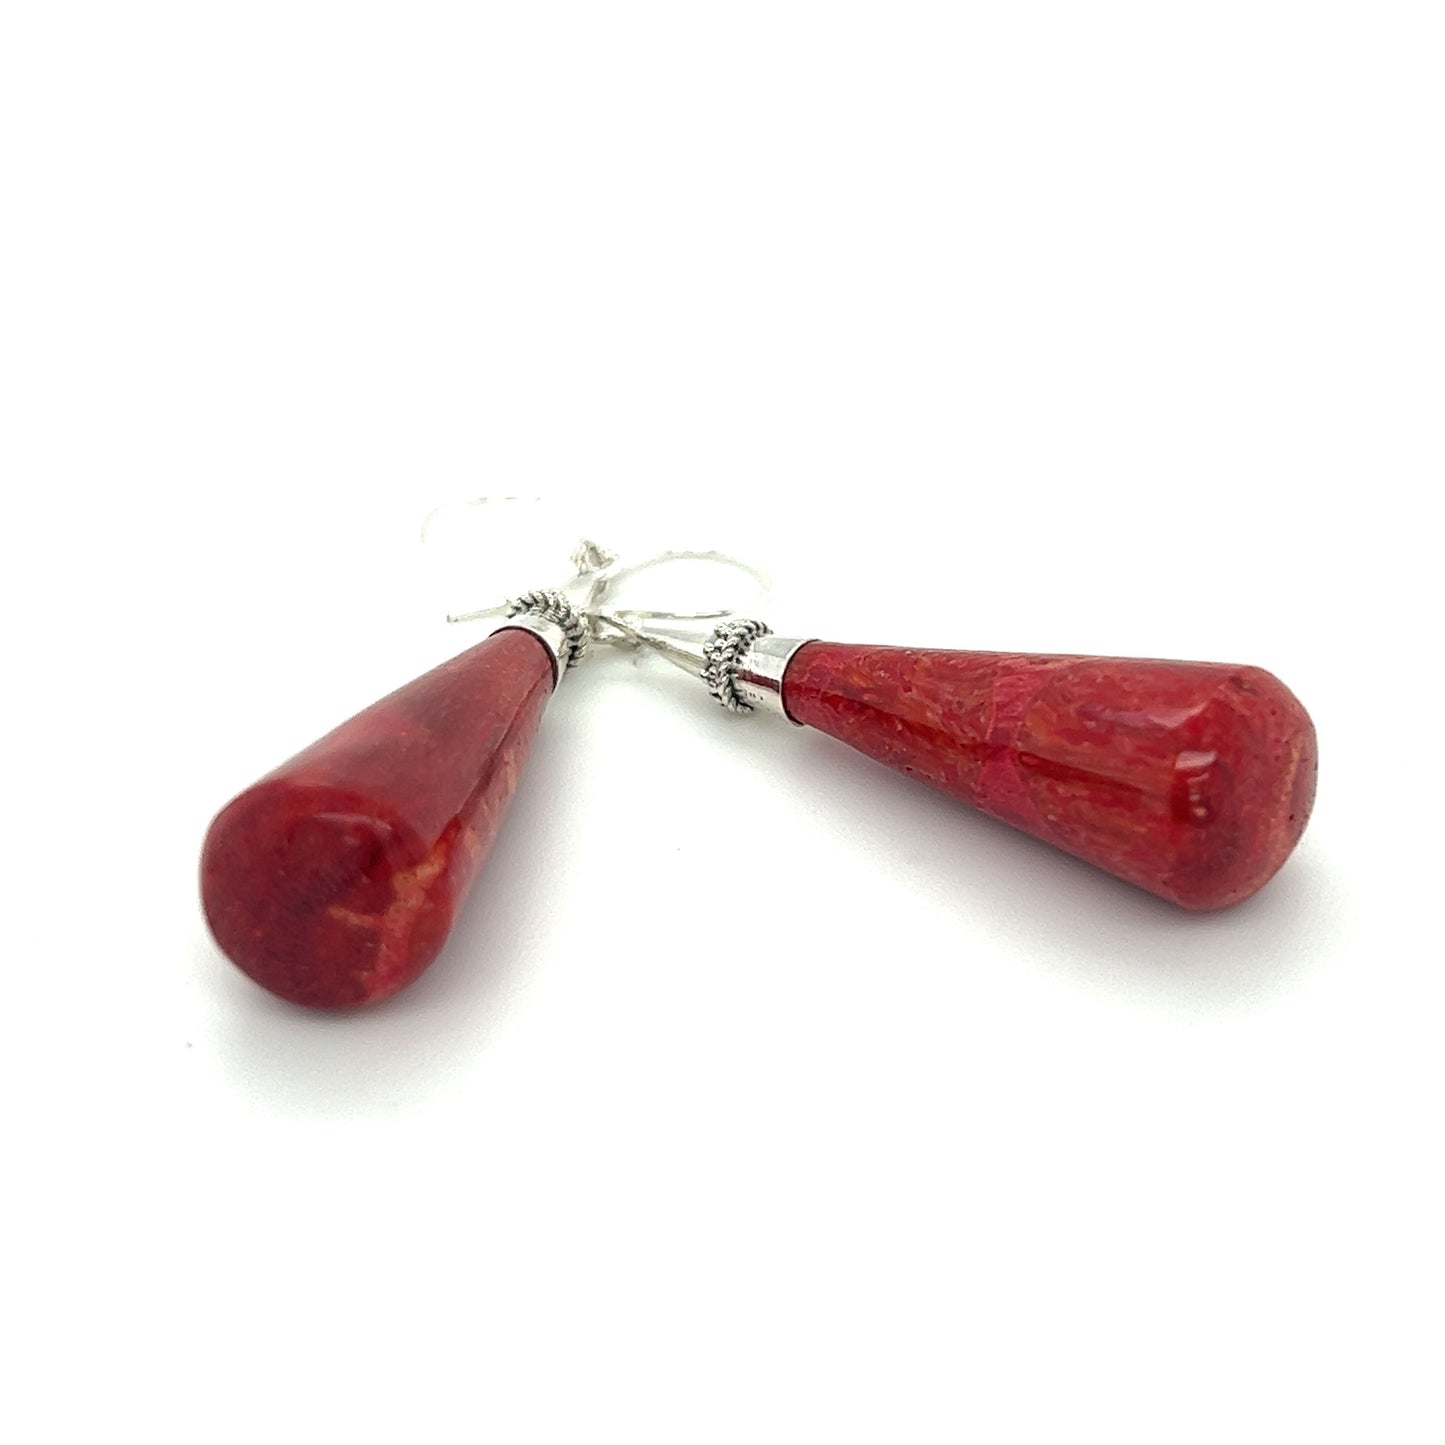 A pair of Super Silver Long Sponge Coral Drop Earrings on a white background, symbolizing happiness.